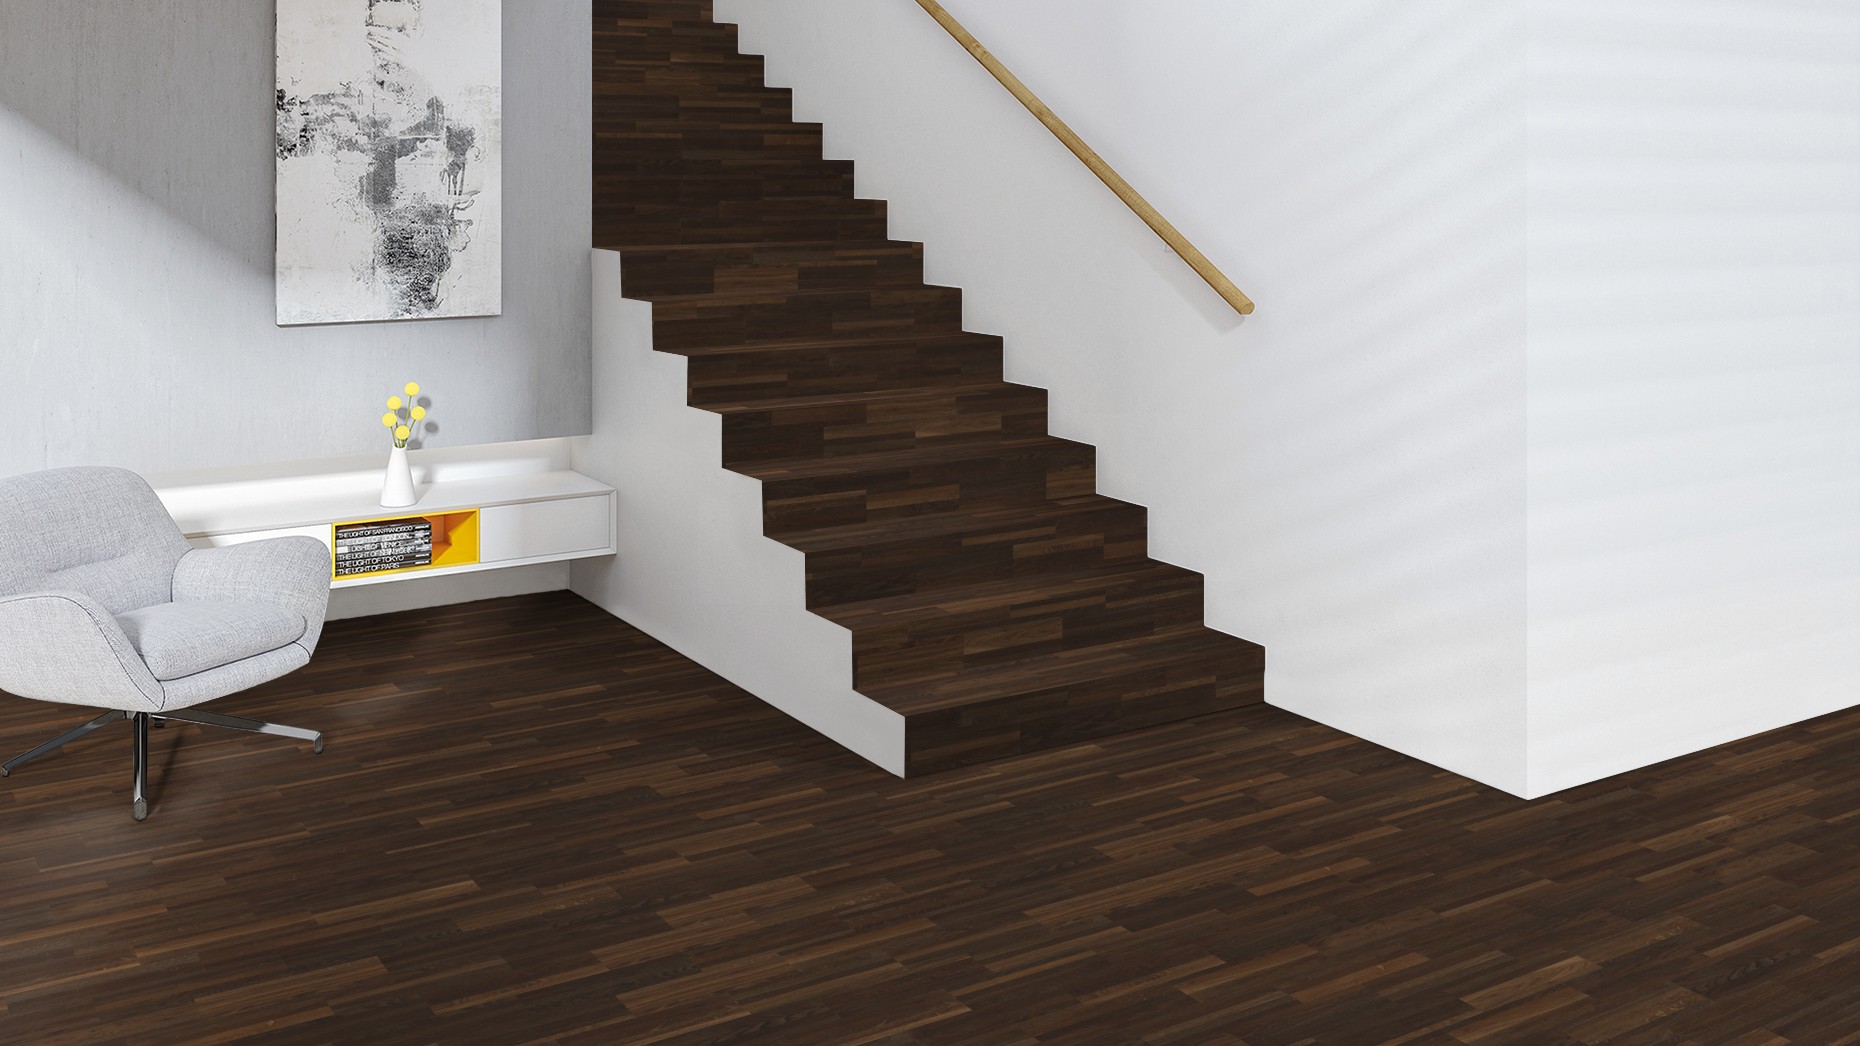 The made-to-measure parquet solution for your staircase. 